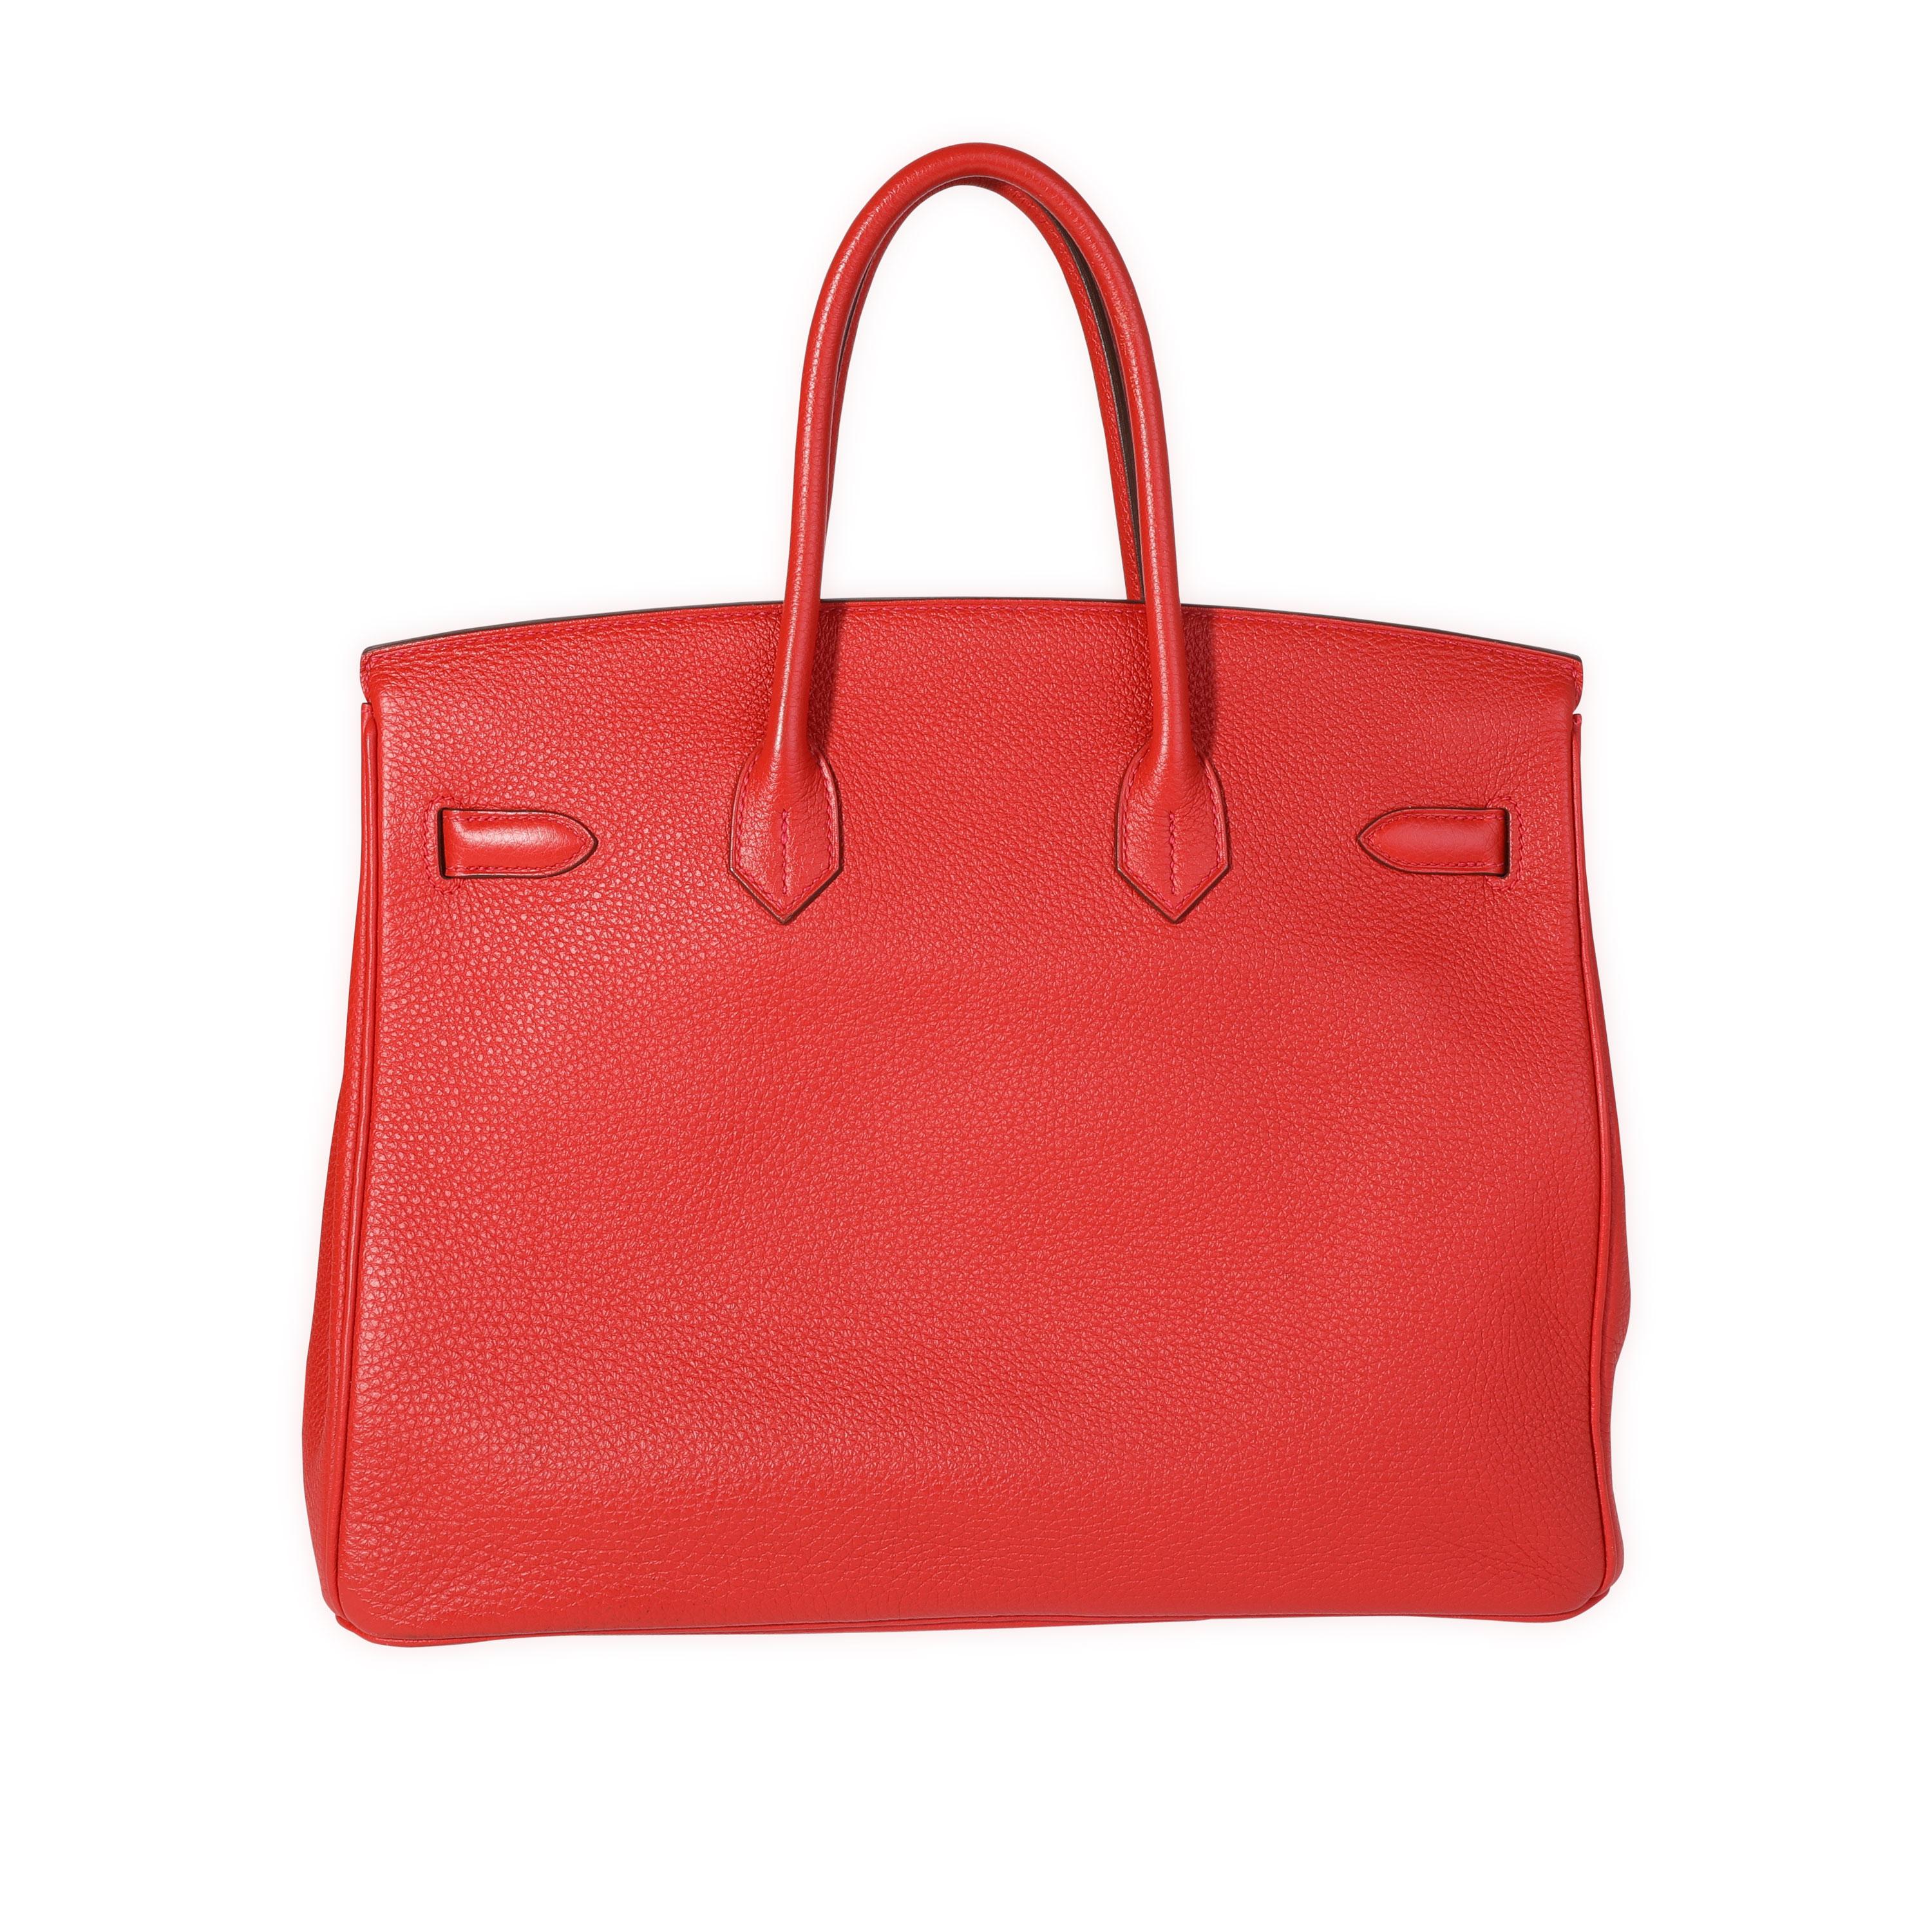 Listing Title: Hermès Rouge Casaque Togo Birkin 35 PHW
SKU: 119360
Condition: Pre-owned (3000)
Handbag Condition: Very Good
Condition Comments: Very Good Condition. Plastic on some hardware. Light scuffing to corners and trim. Black marks to back of